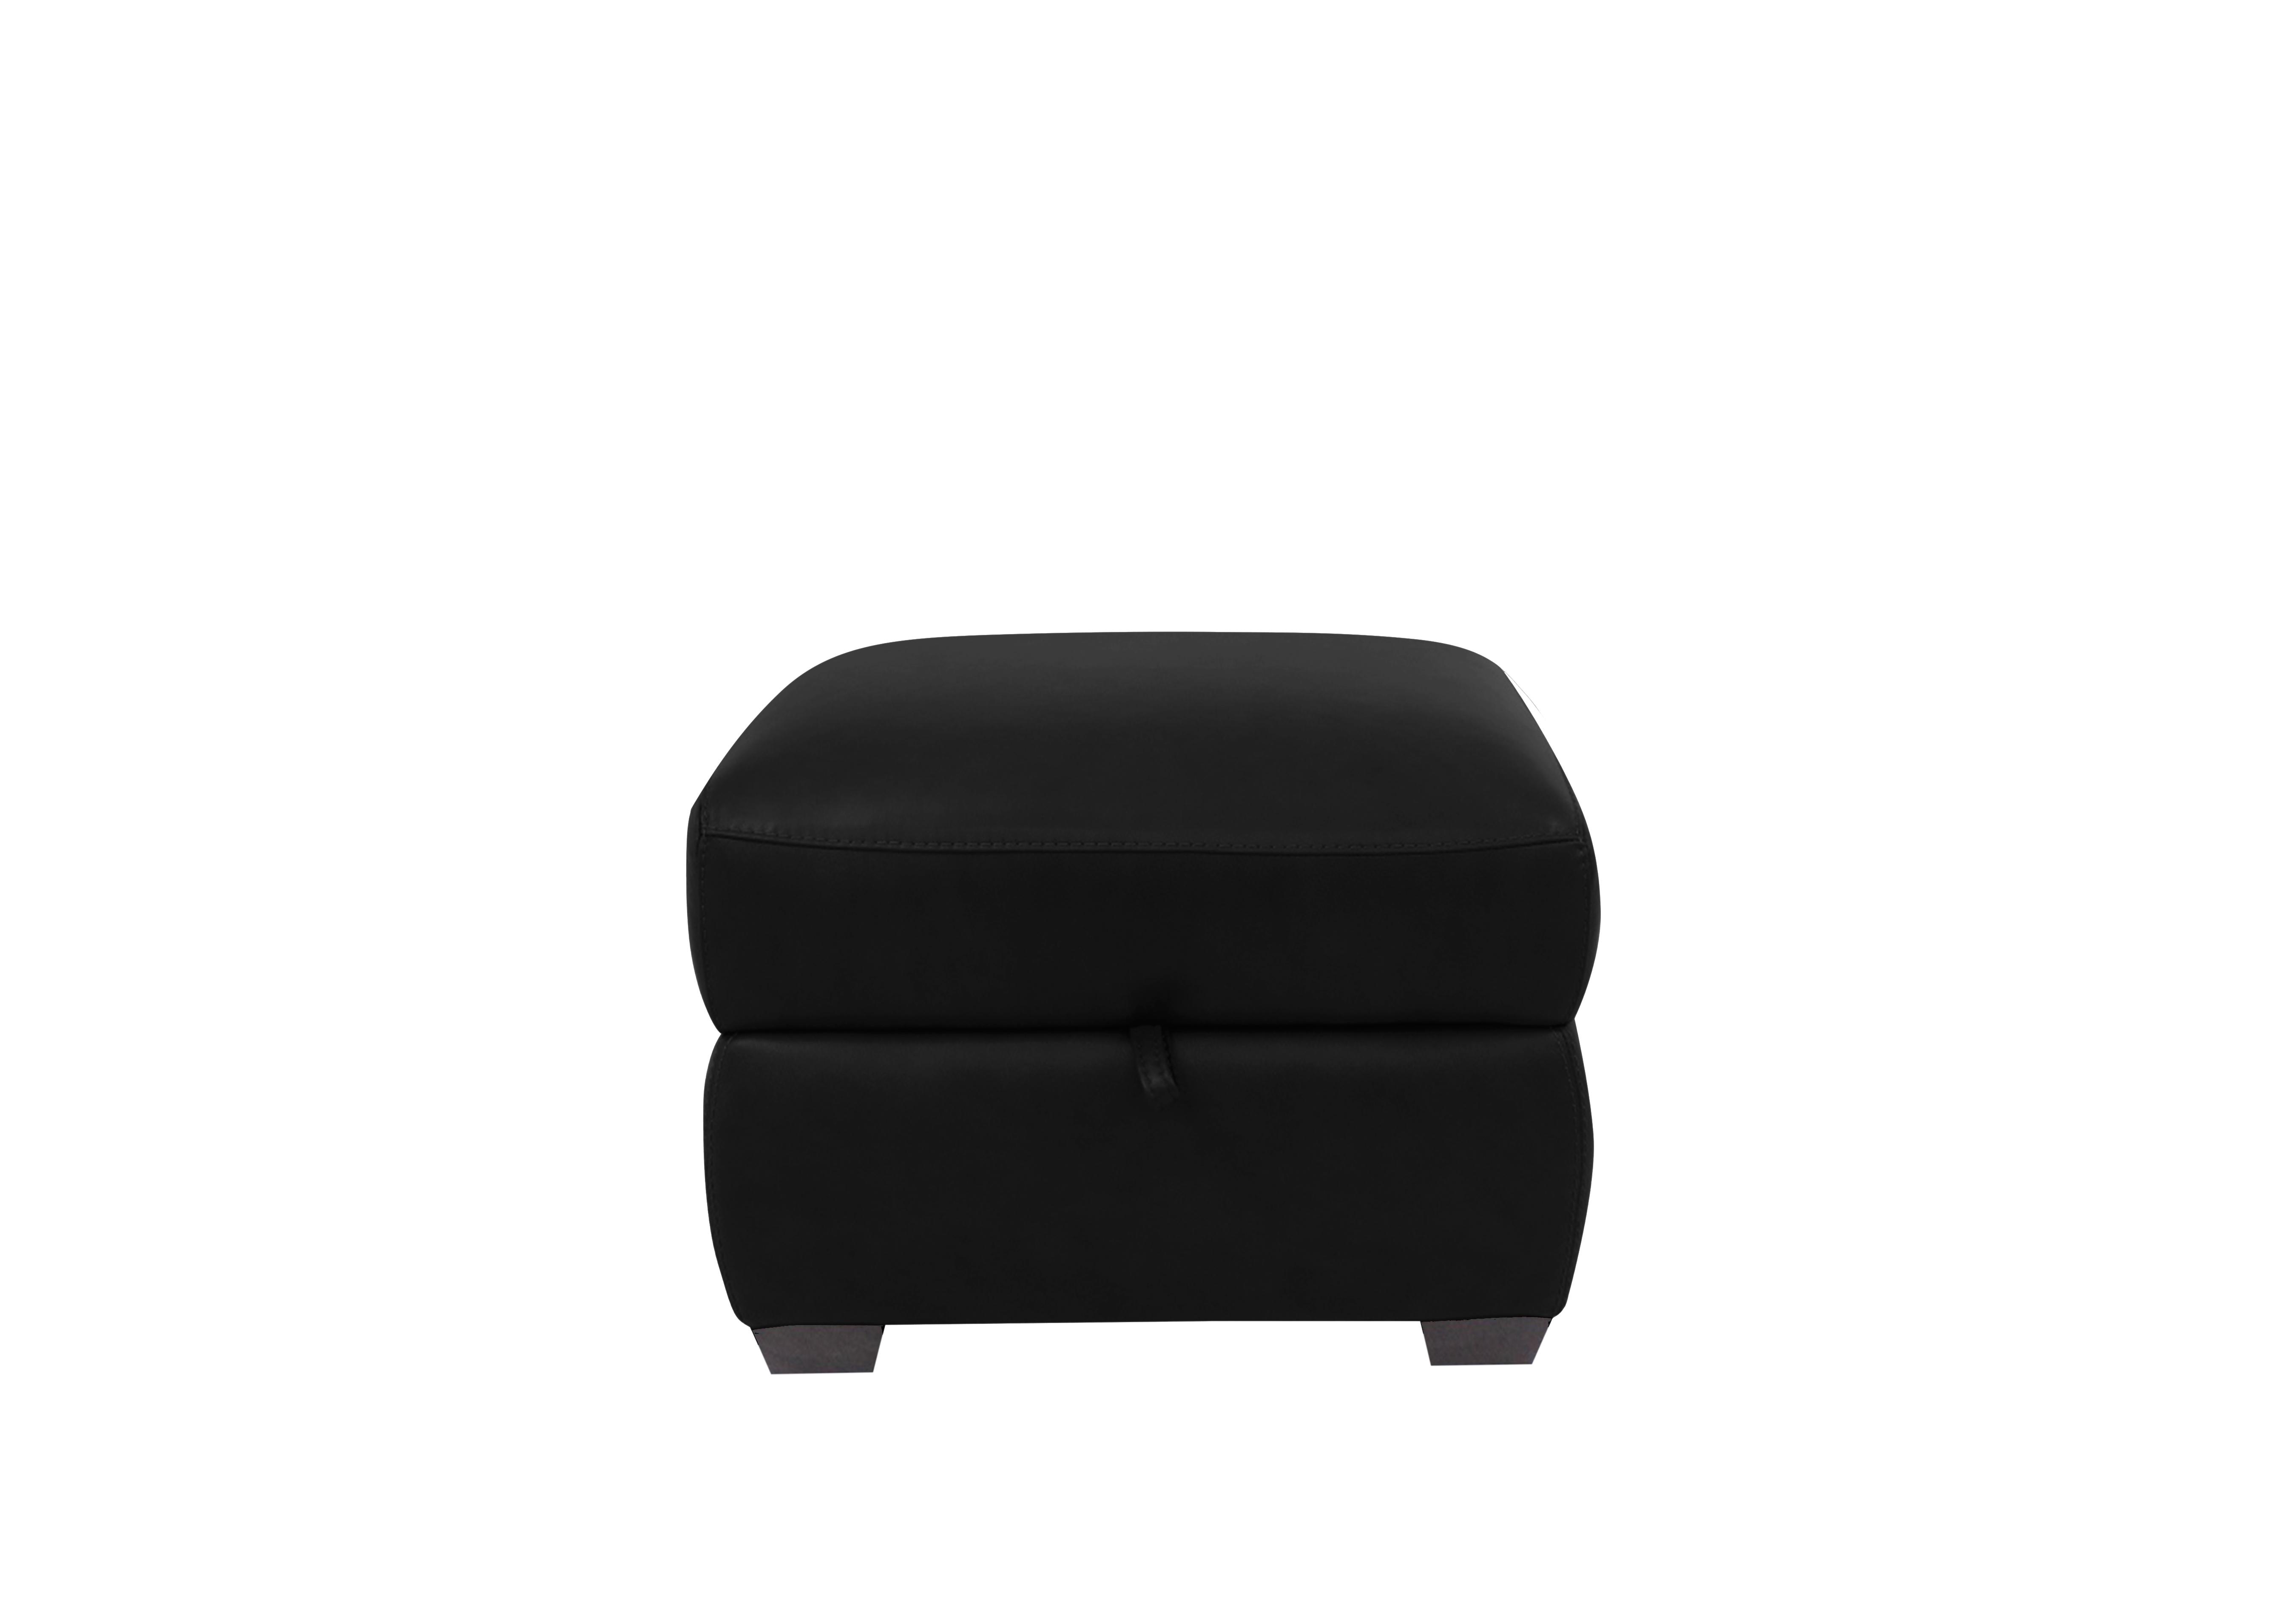 Cozee Leather Storage Stool in An-671b Black on Furniture Village